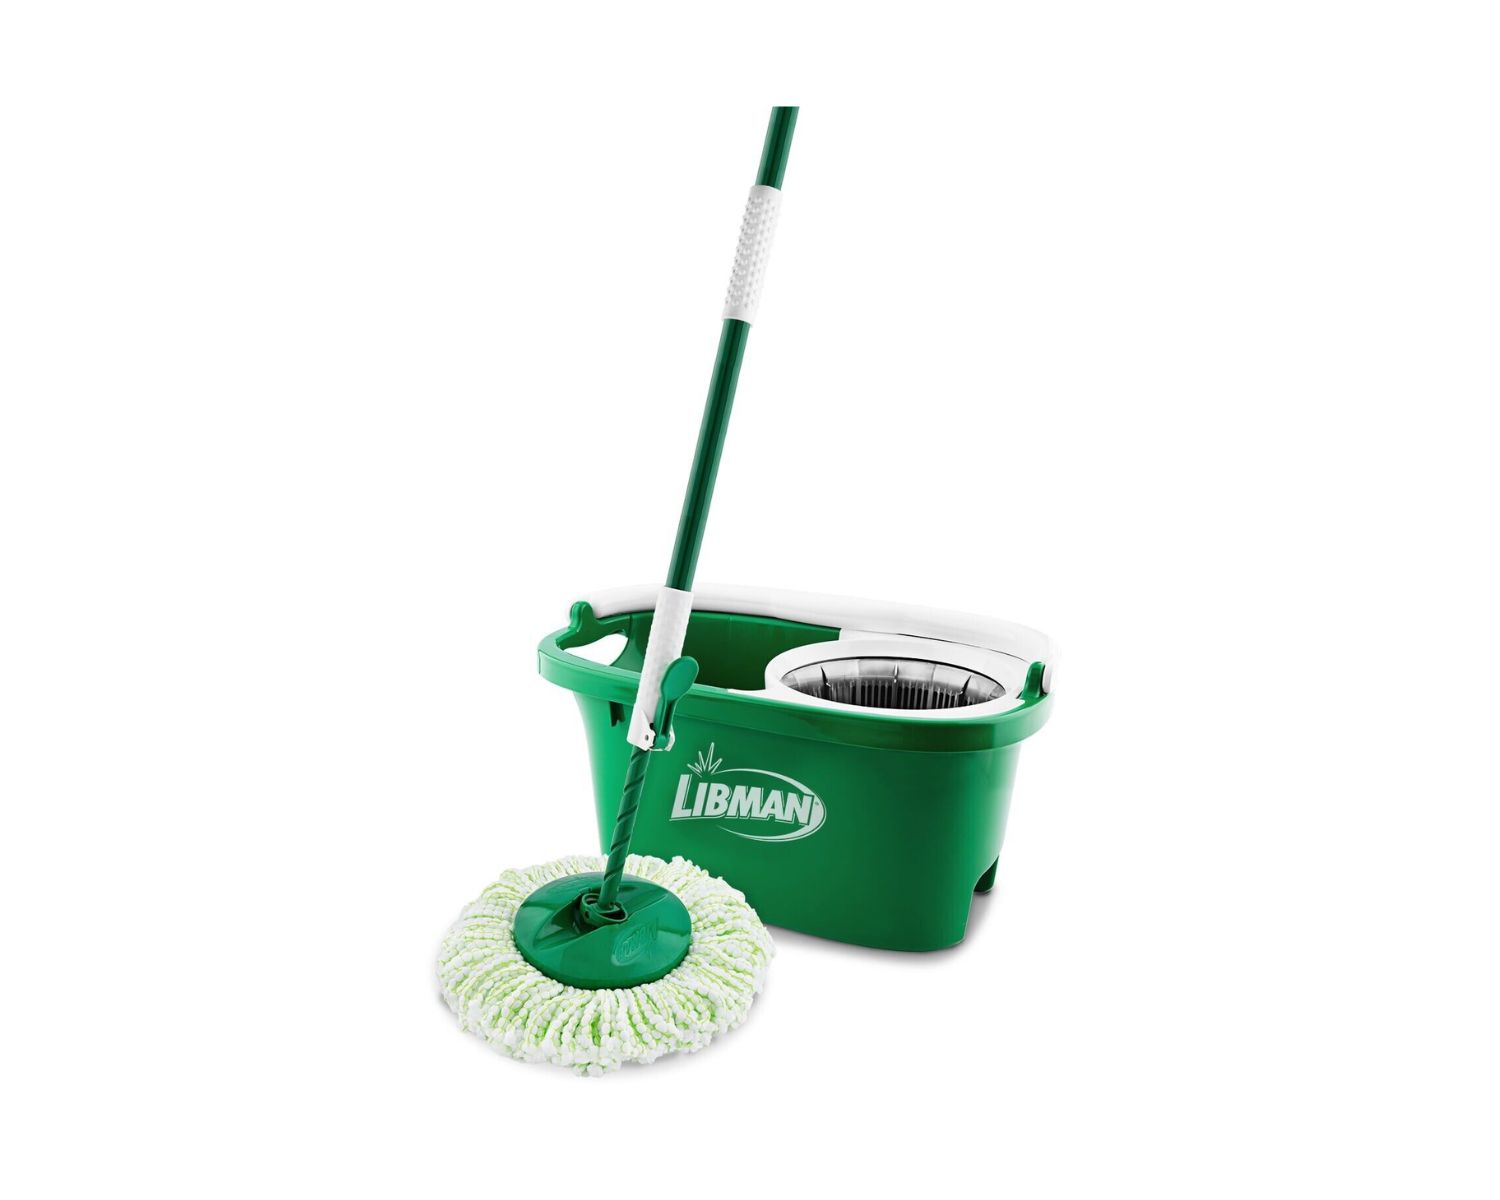 How To Remove Mop Head From Libman Spin Mop